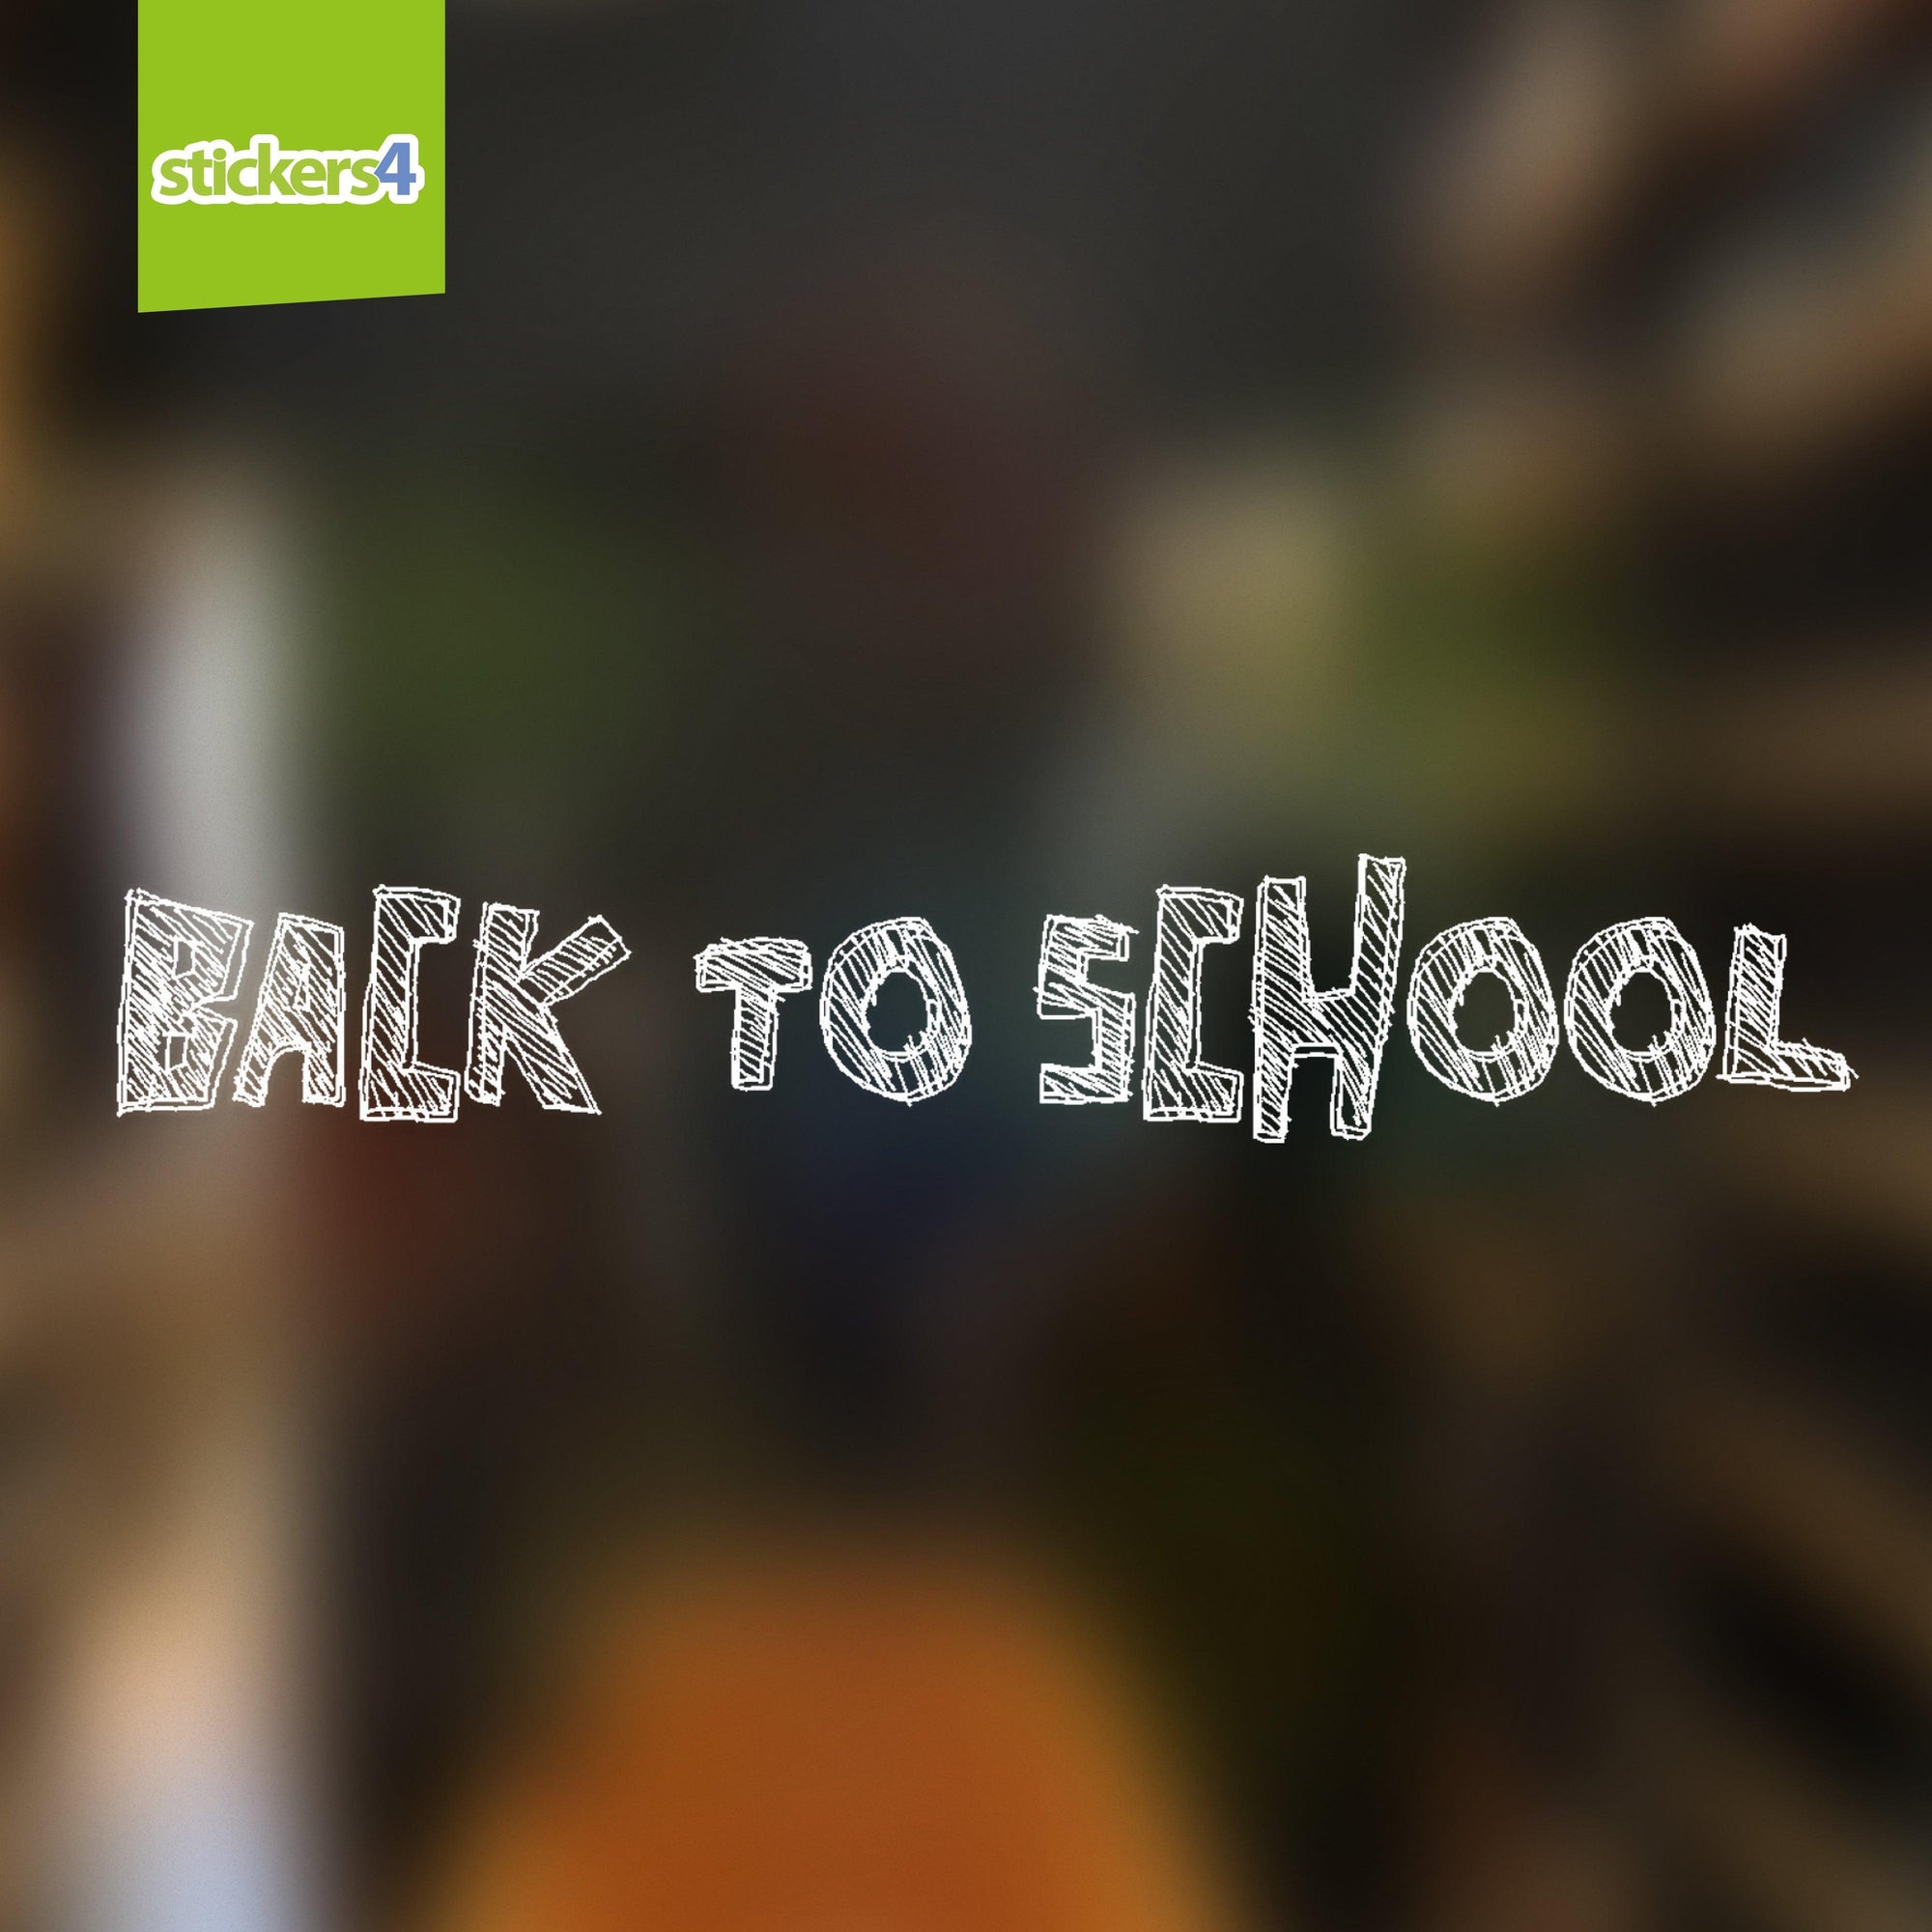 Back to School Sketch Text Banner Retail Window Display